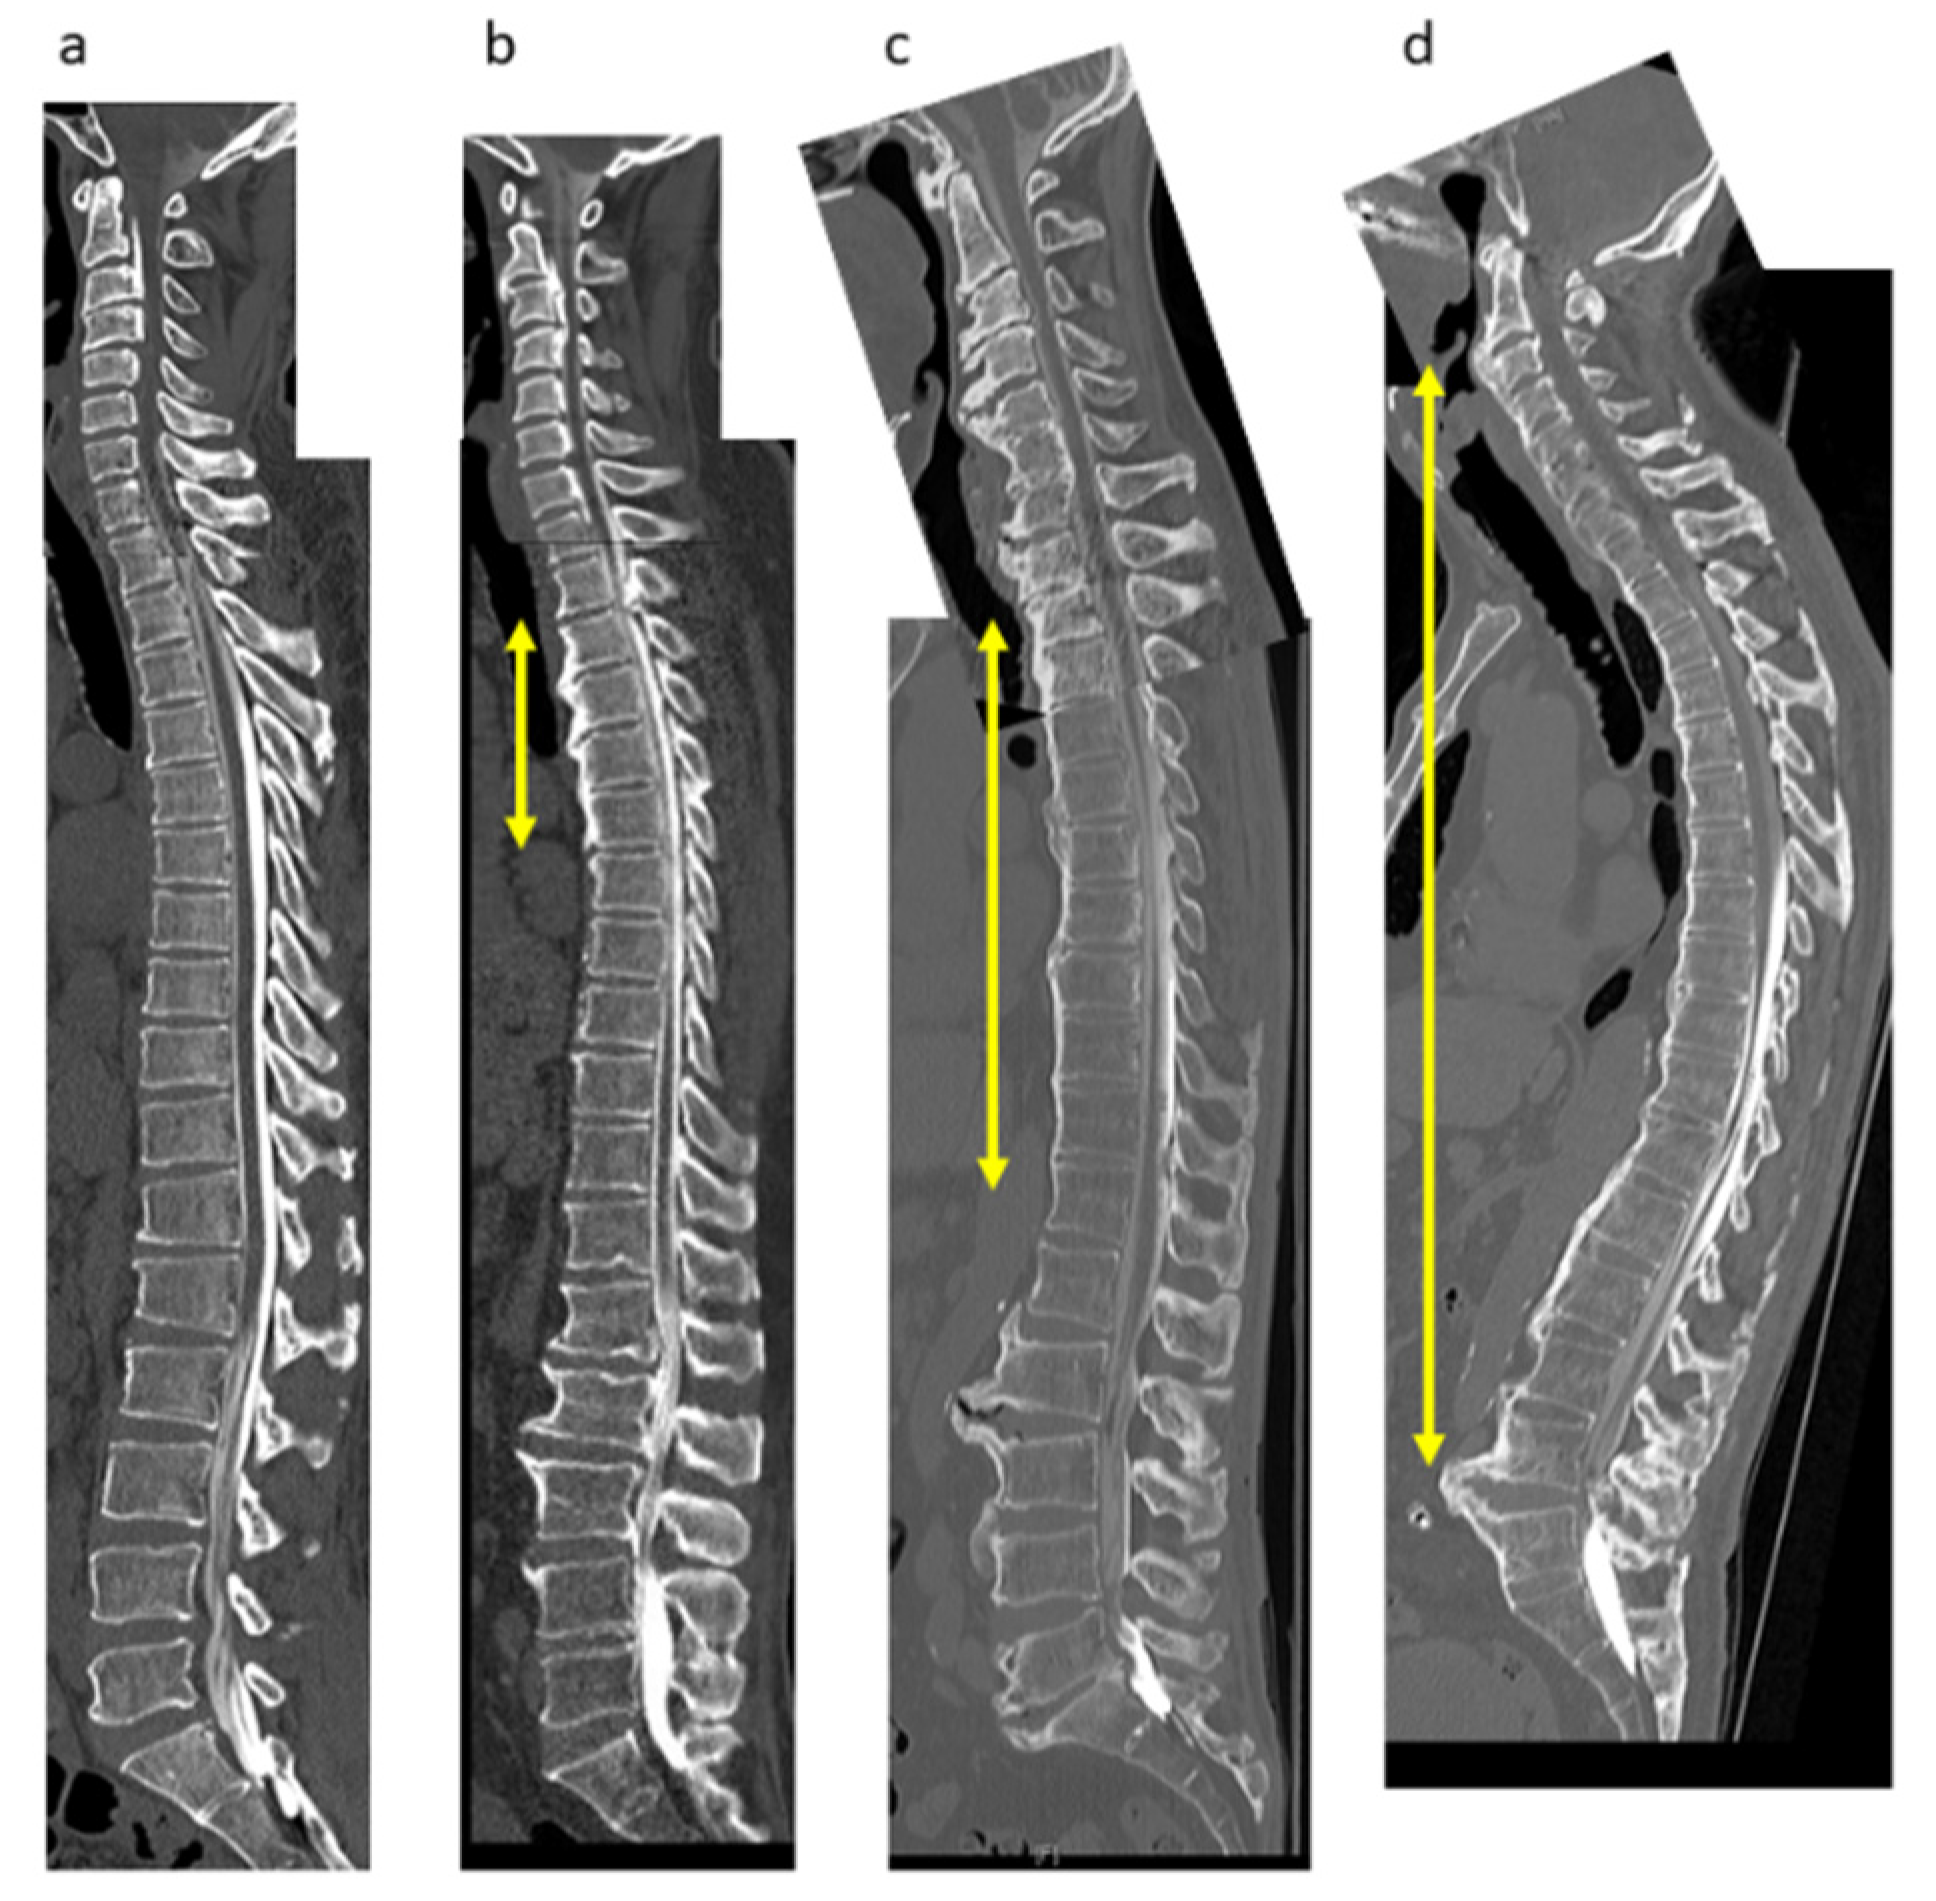 diffuse idiopathic skeletal hyperostosis cervical spine